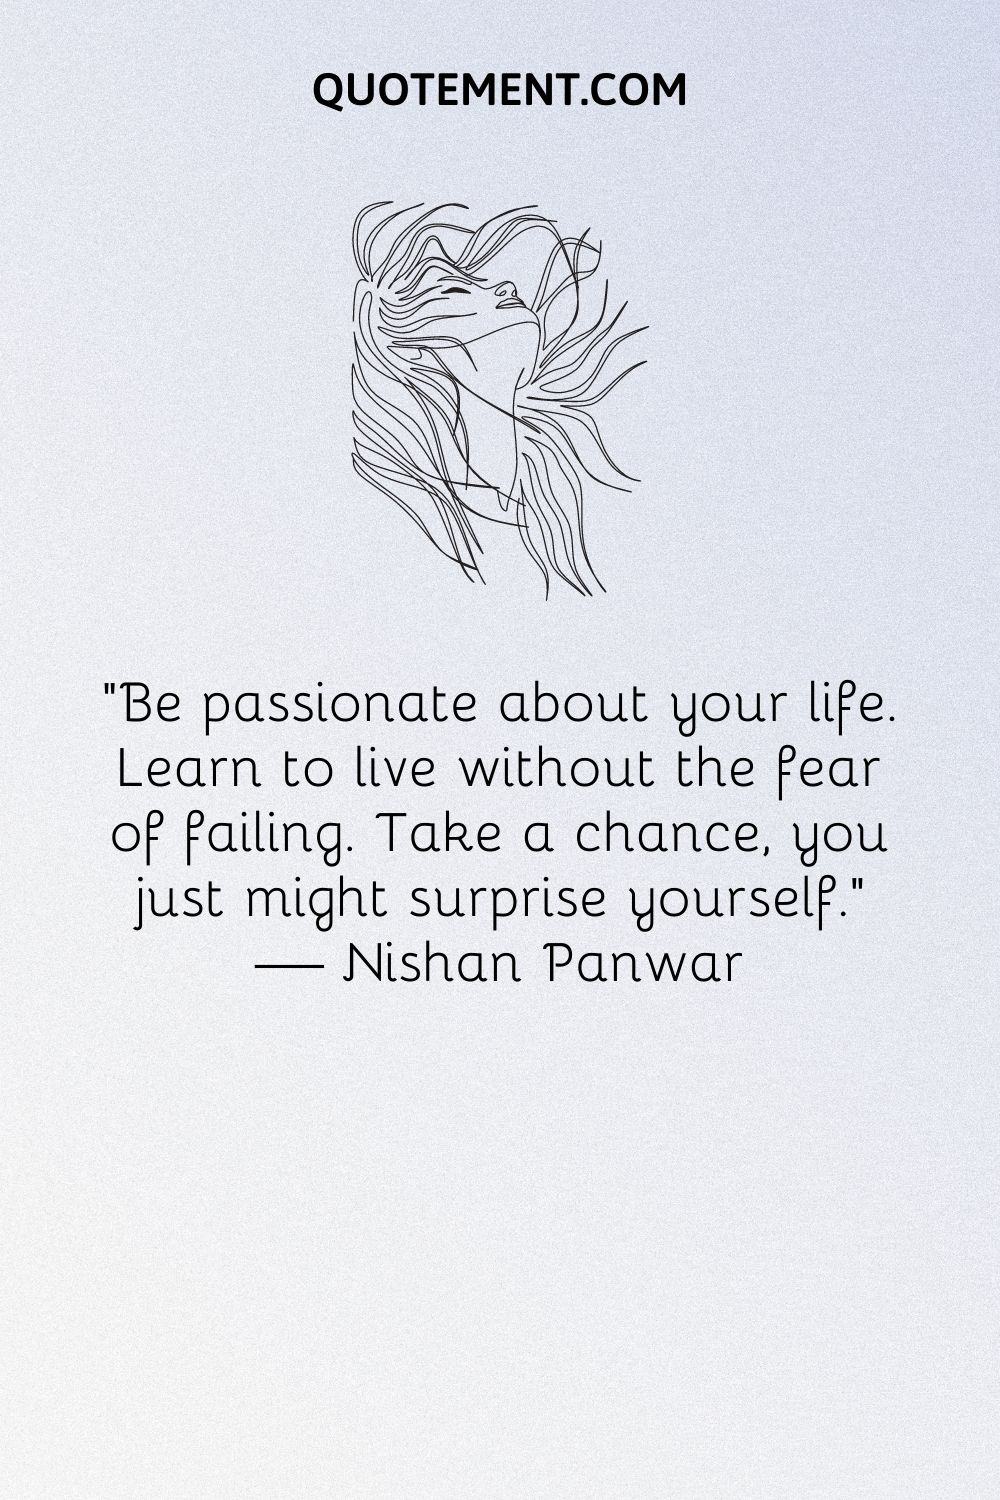 Be passionate about your life